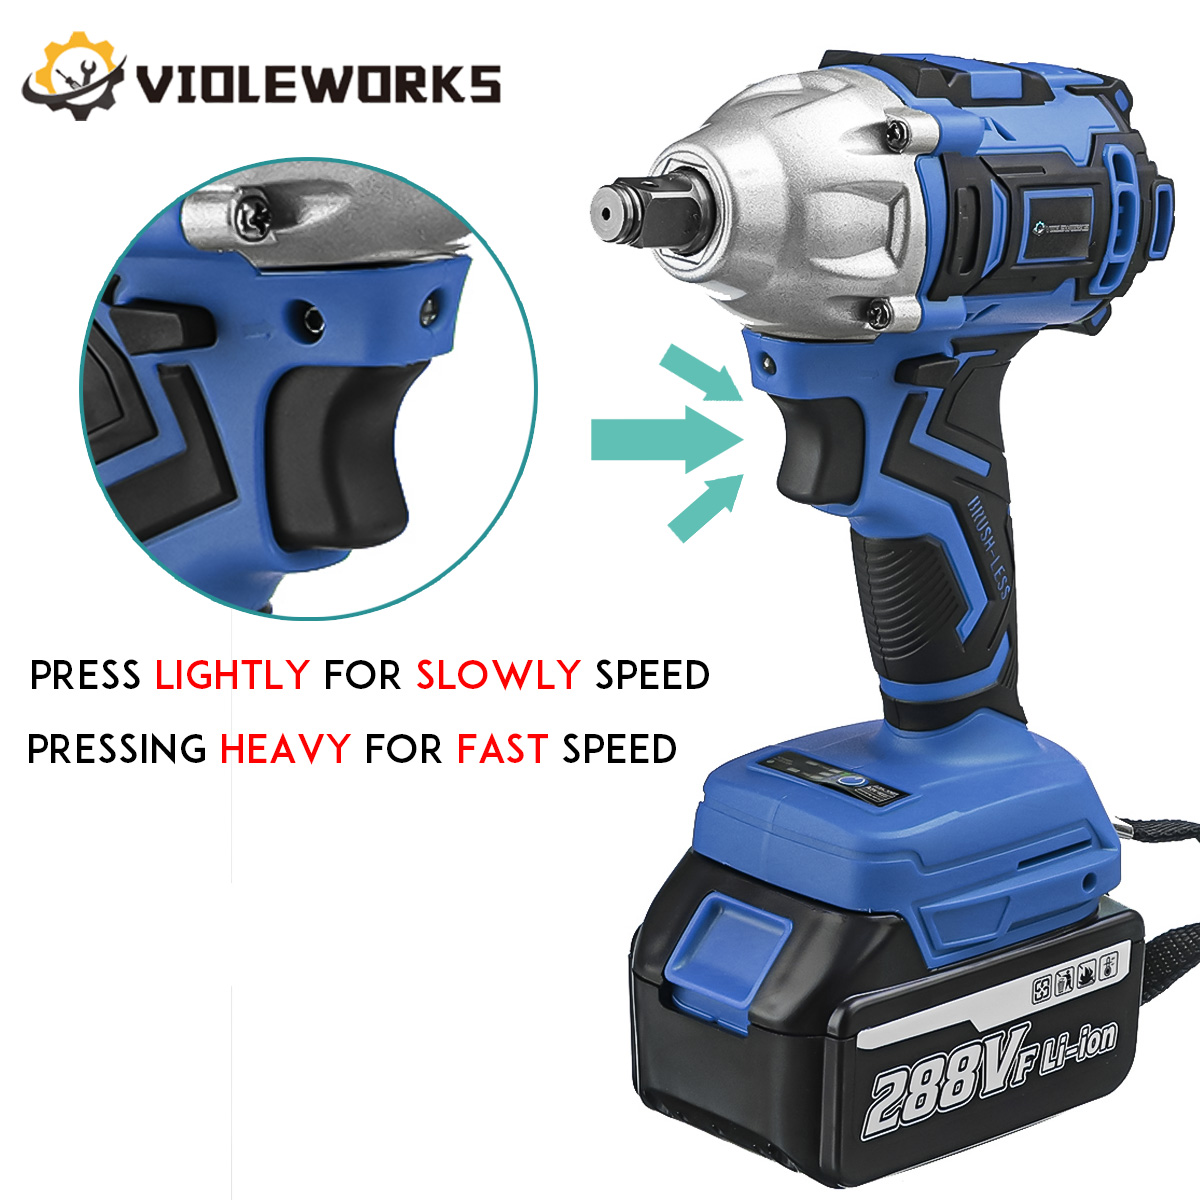 VIOLEWORKS-288VF-12quot-320NM-Electric-Wrench-Cordless-Brushless-Impact-Wrench-With-210-Battery-Also-1833240-4